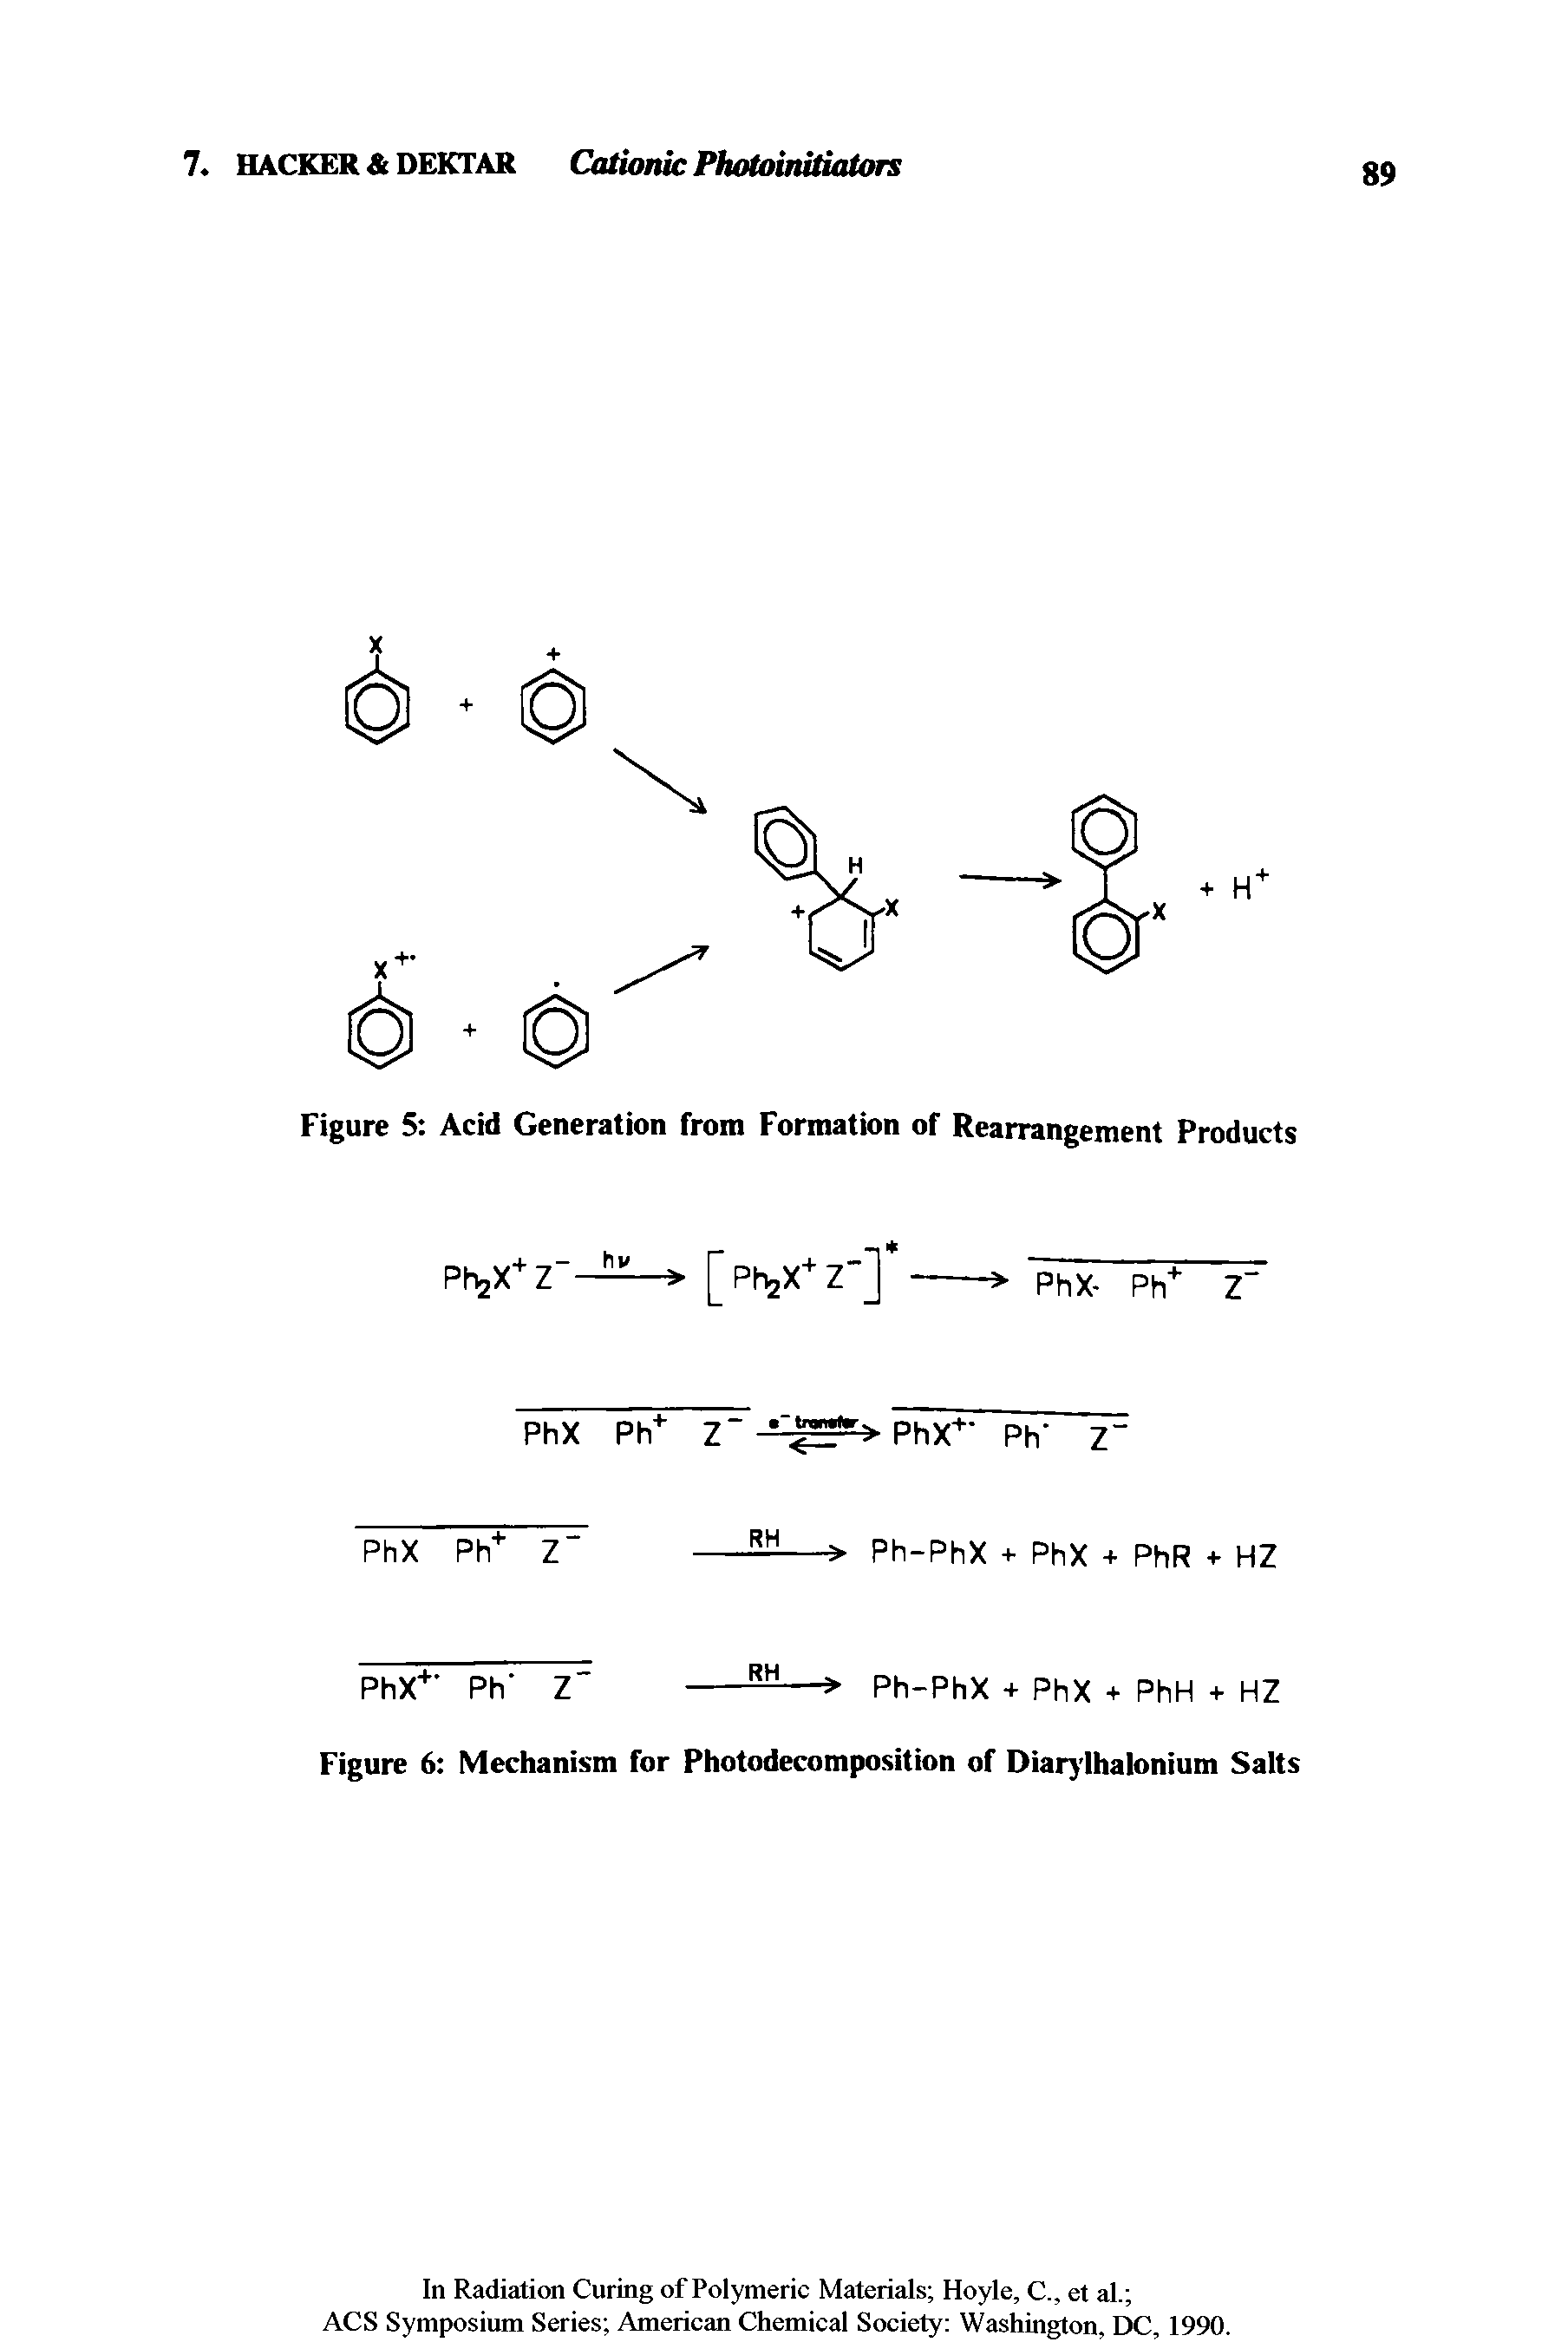 Figure 5 Acid Generation from Formation of Rearrangement Products...